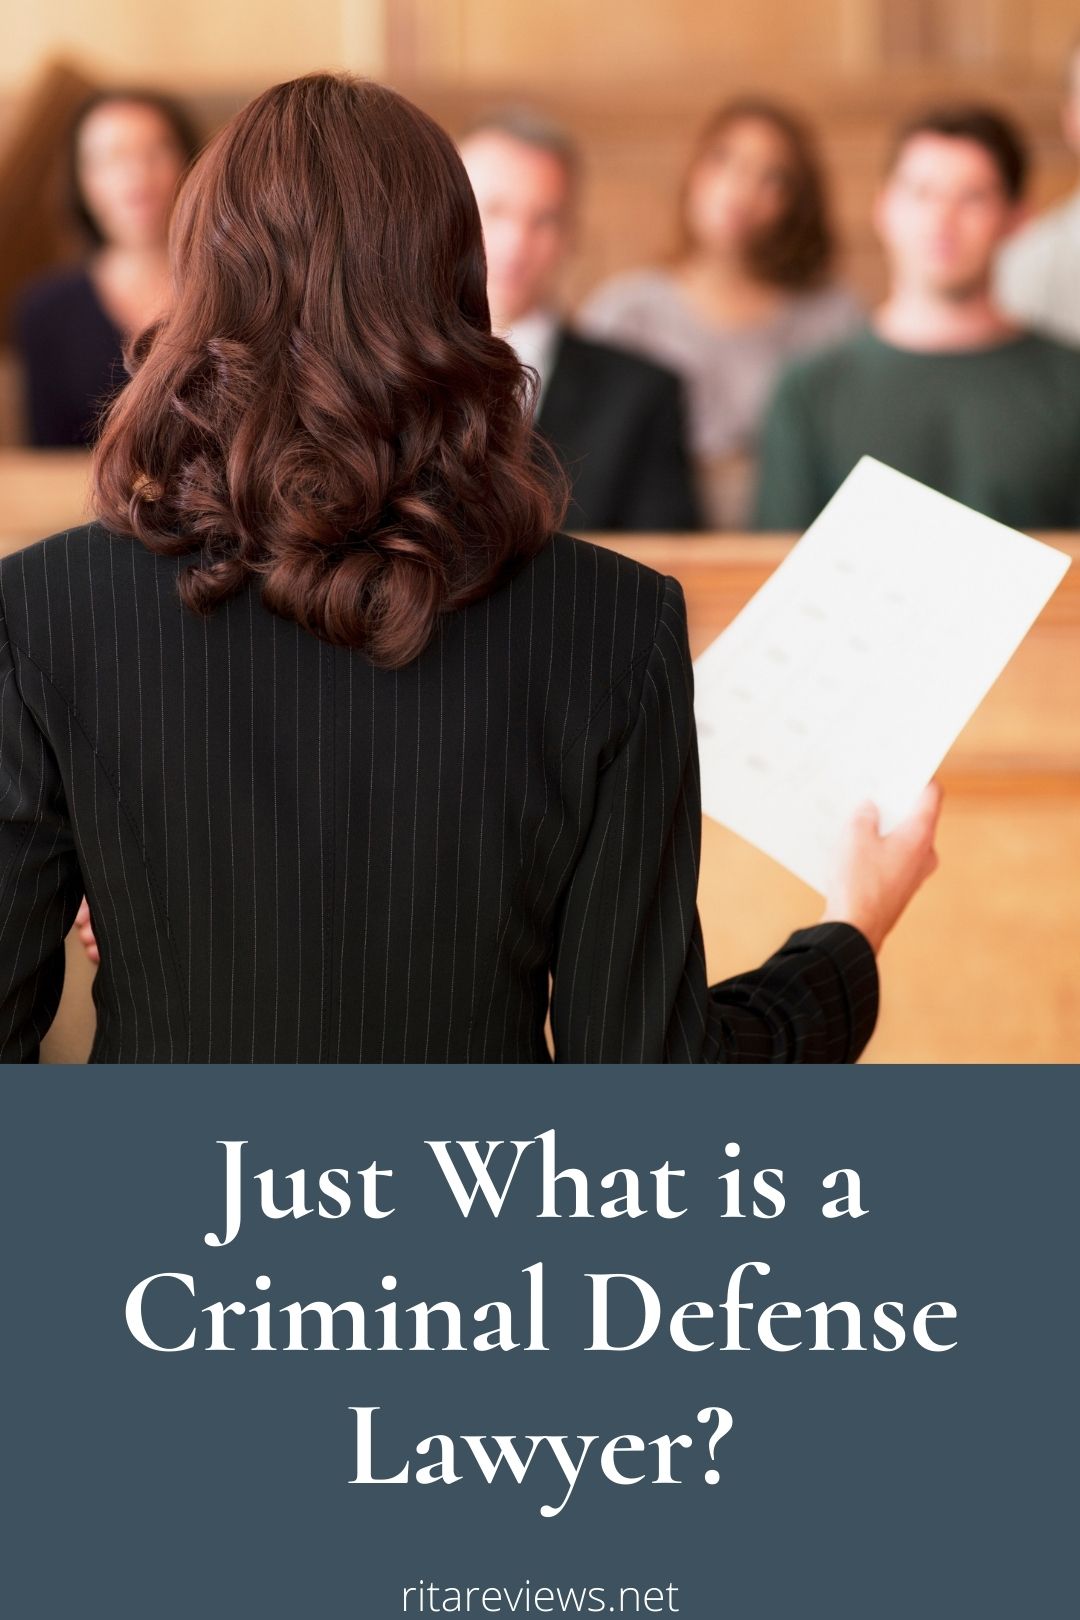 Just What is a Criminal Defense Lawyer